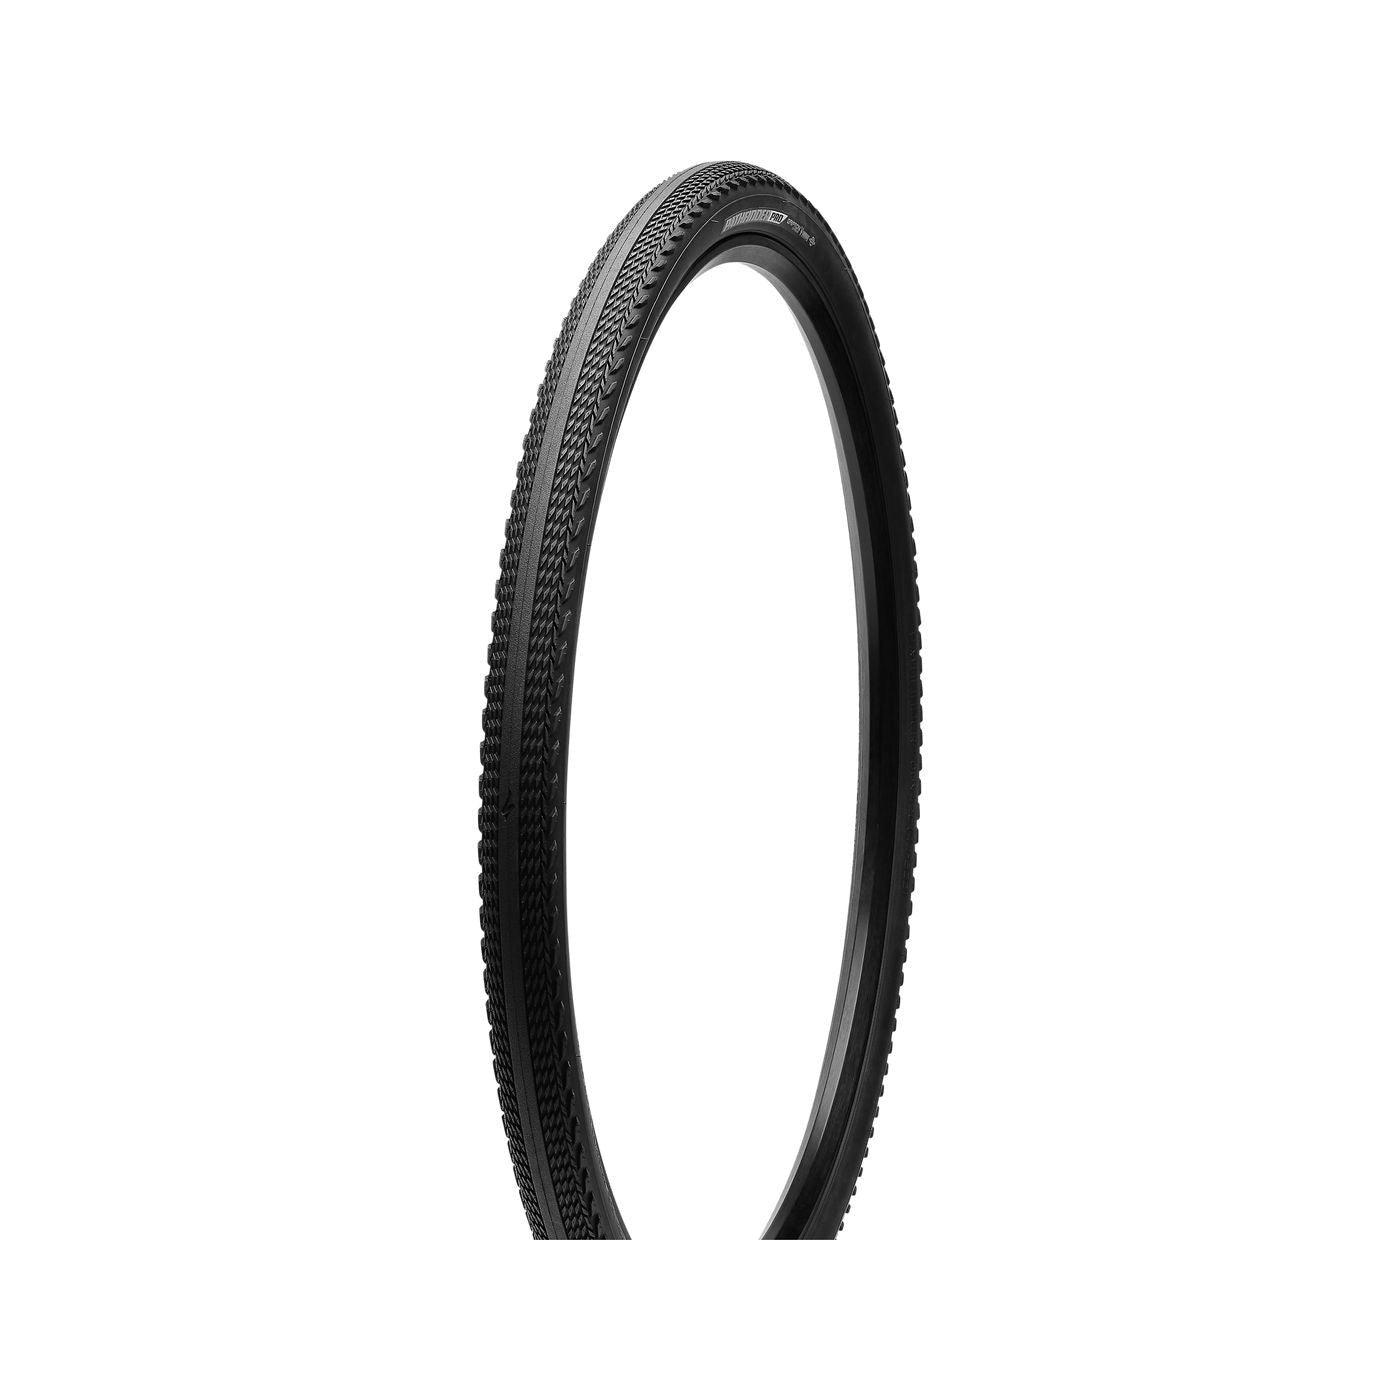 Specialized Pathfinder Pro 2Bliss Ready 27.5" Bike Tire - Tires - Bicycle Warehouse